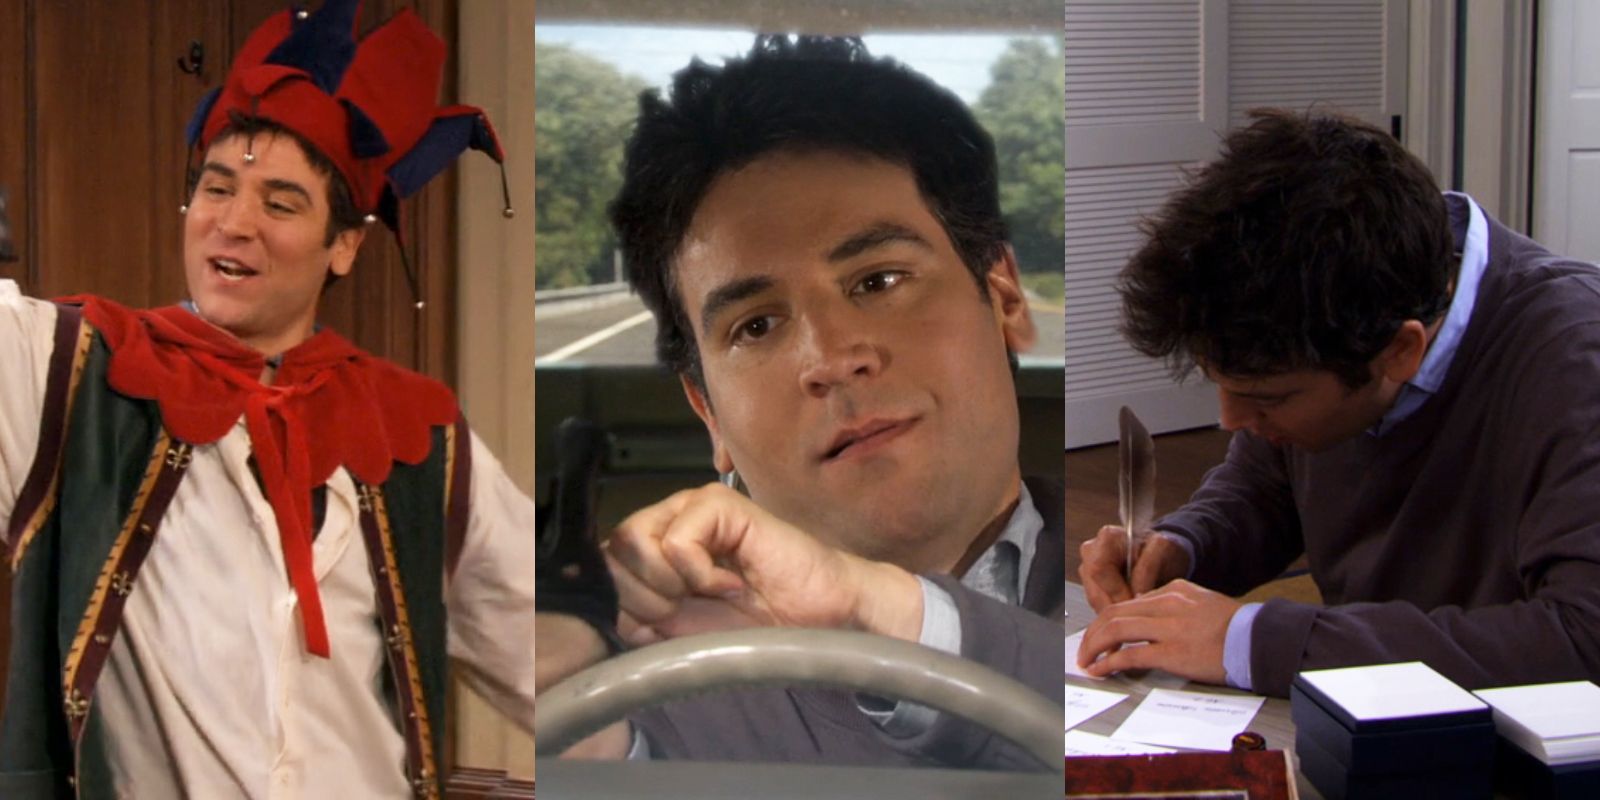 How I Met Your Mother: Three images of Ted being playful, reading, and writing.